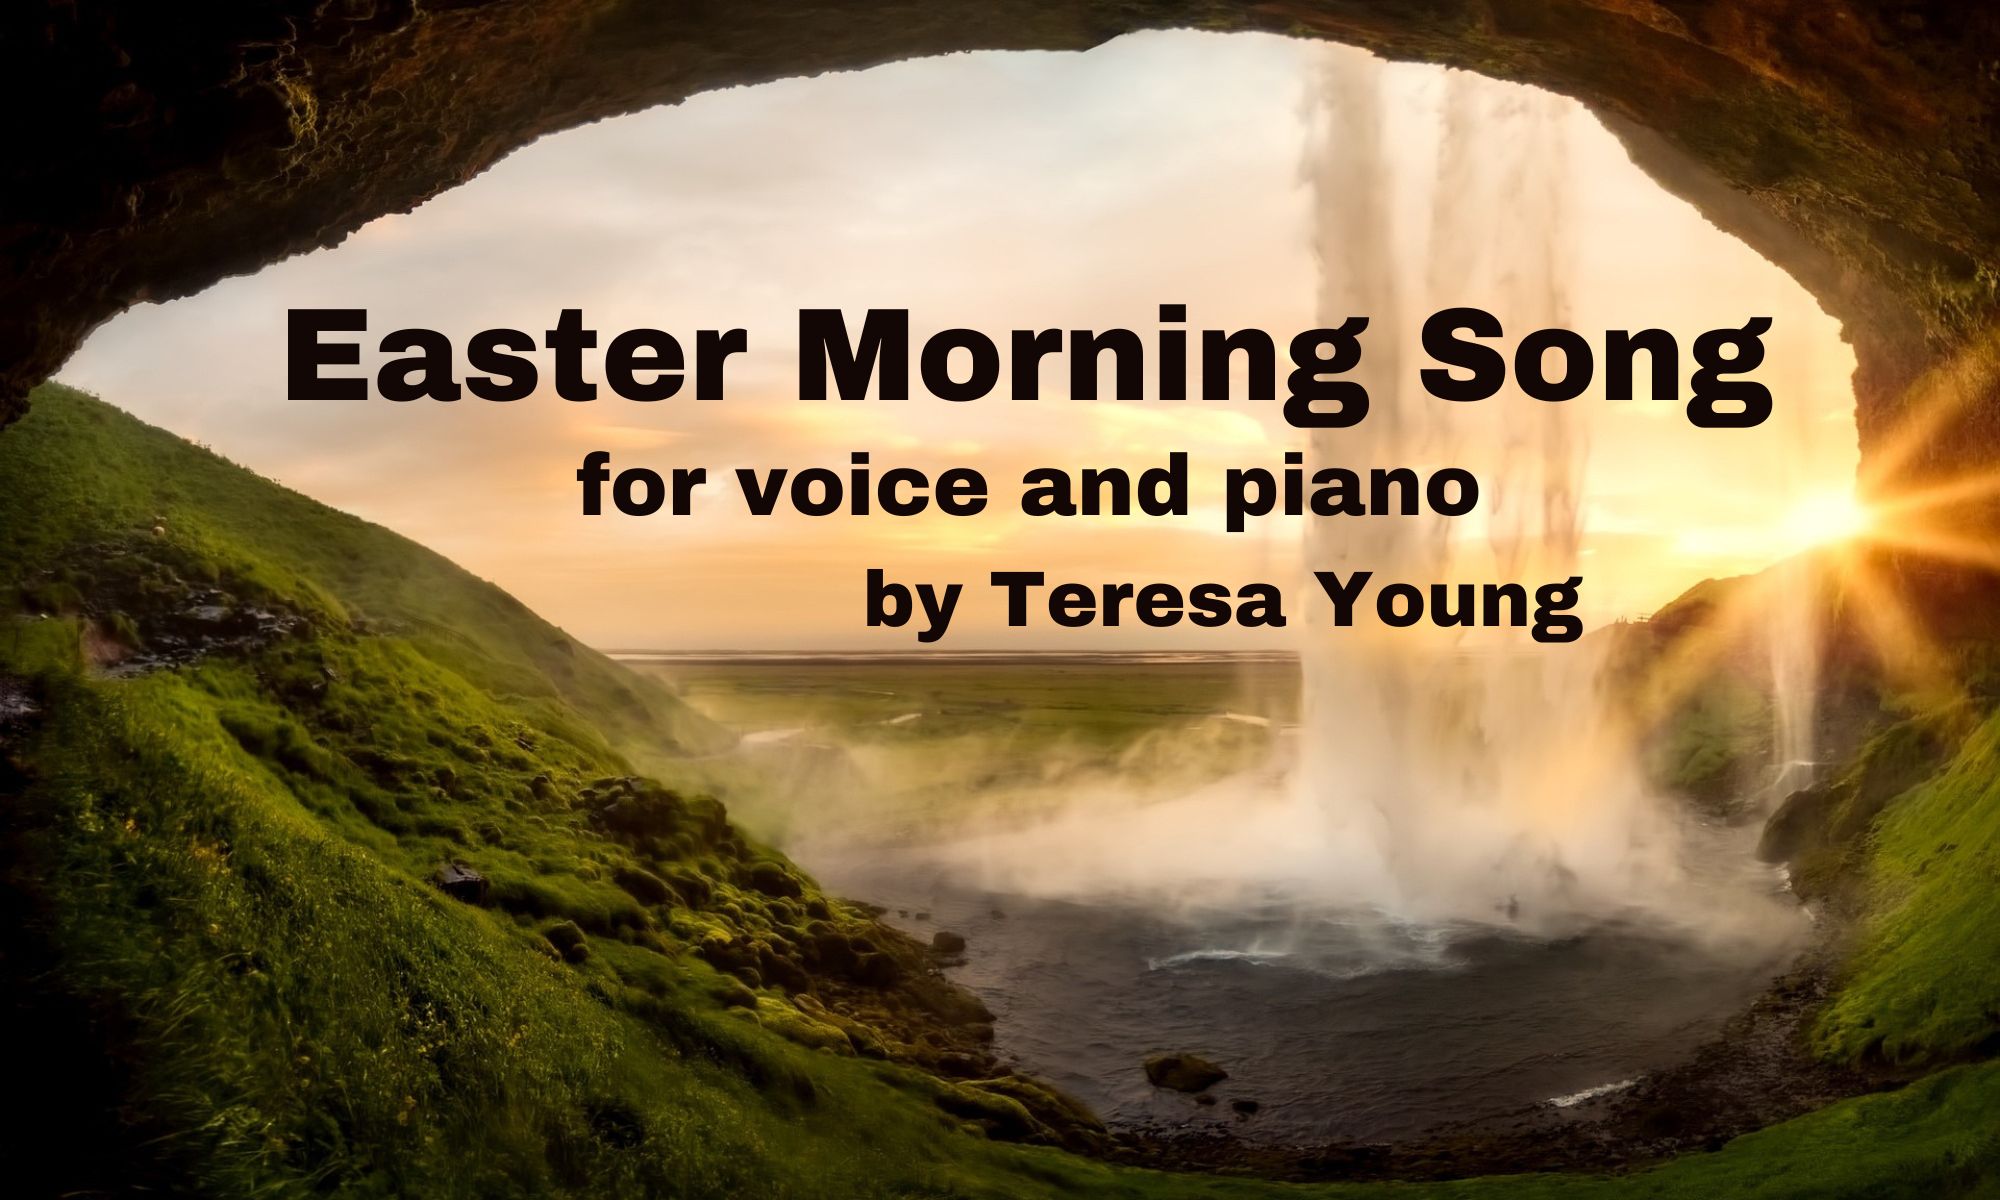 Easter Morning Song, sheet music by Teresa Young